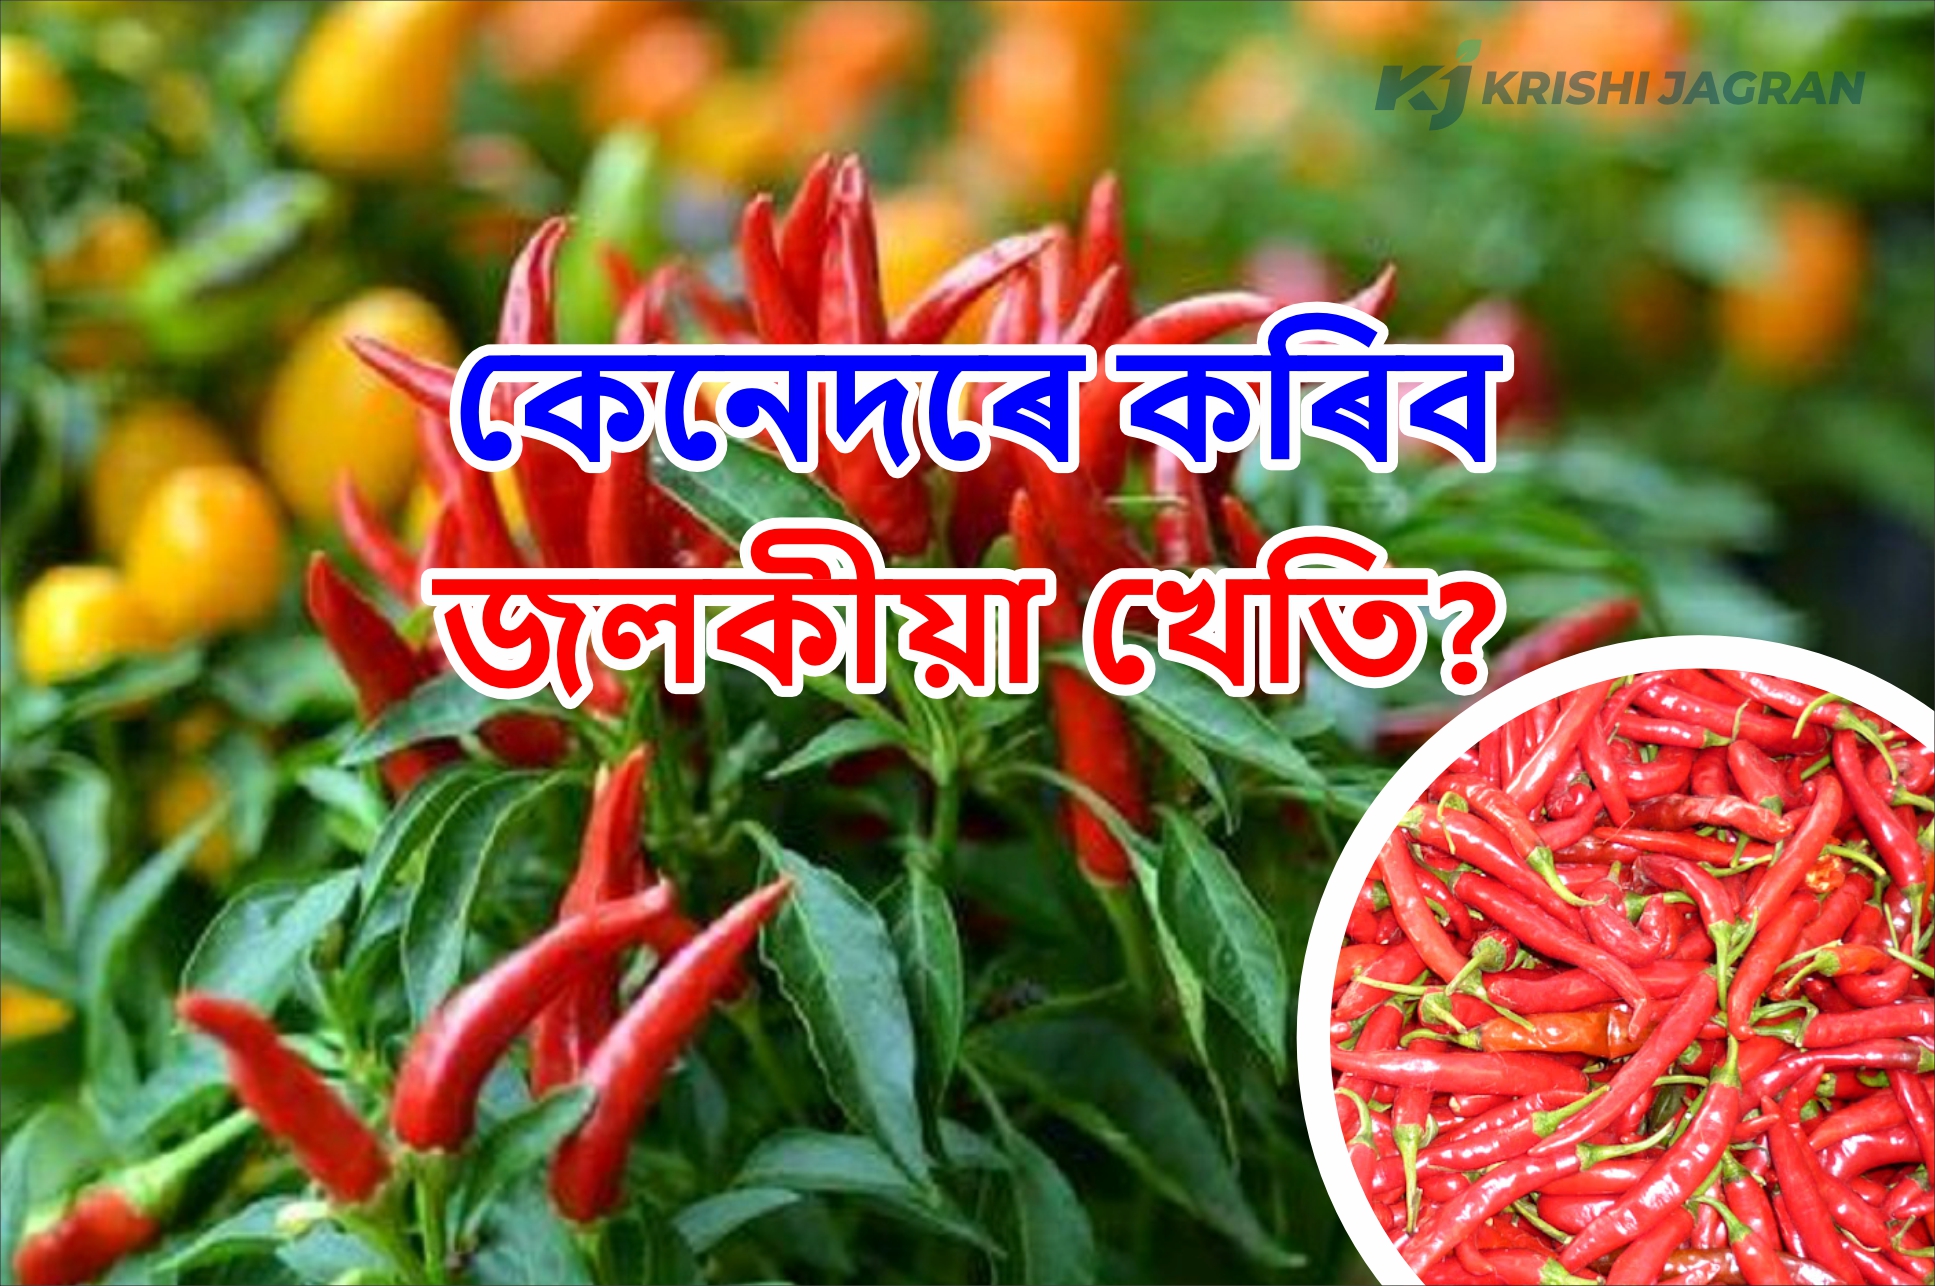 Chili Cultivation, a profitable Business for farmers